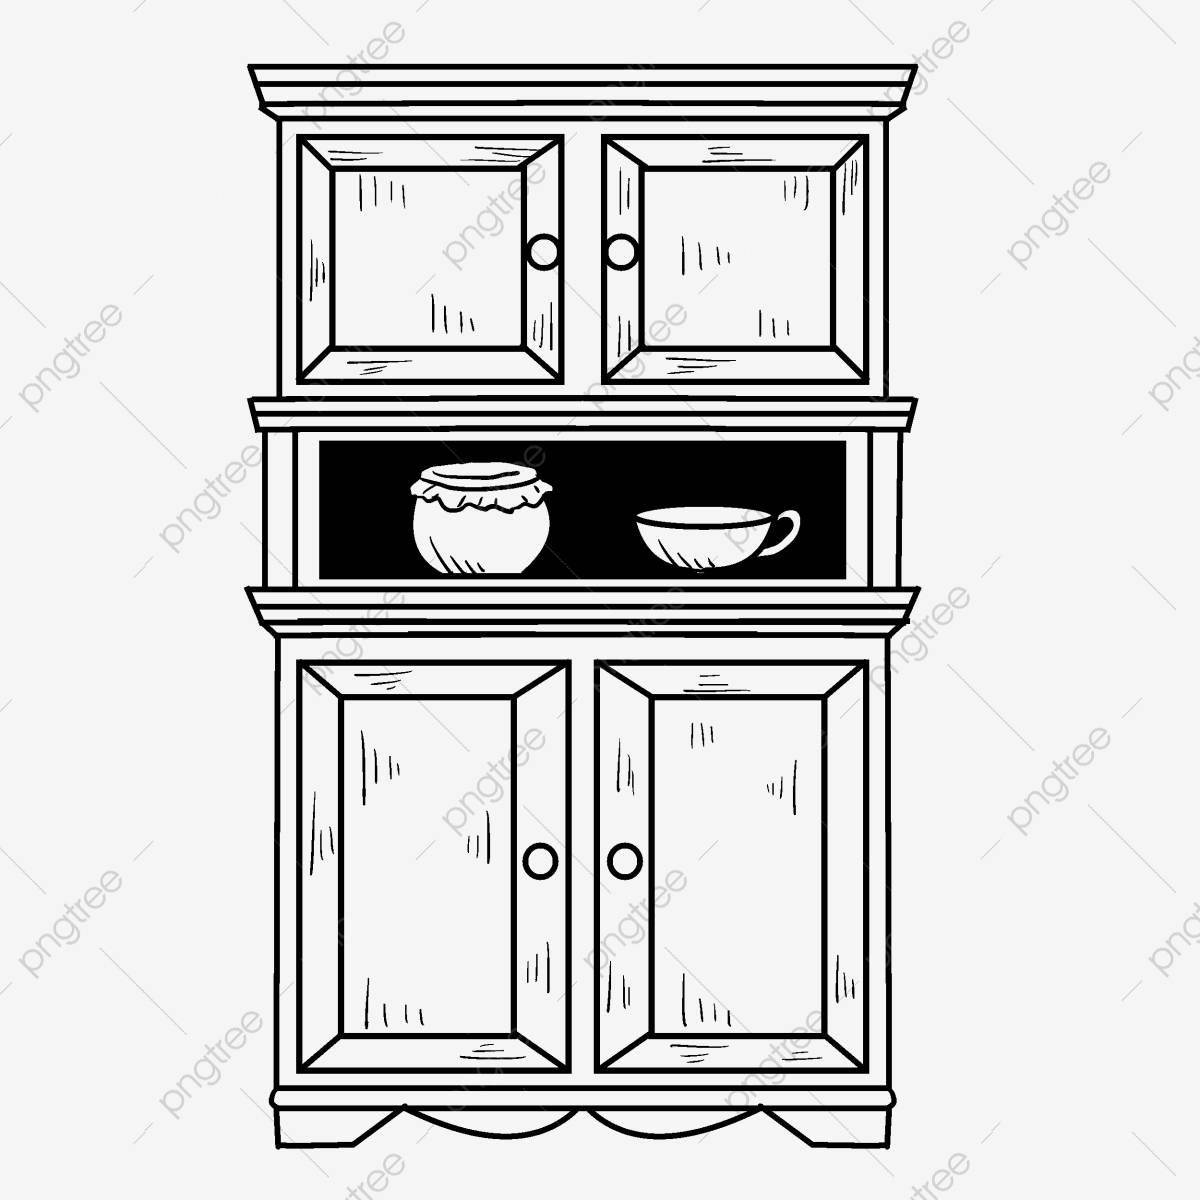 Cute kitchen cabinet coloring page